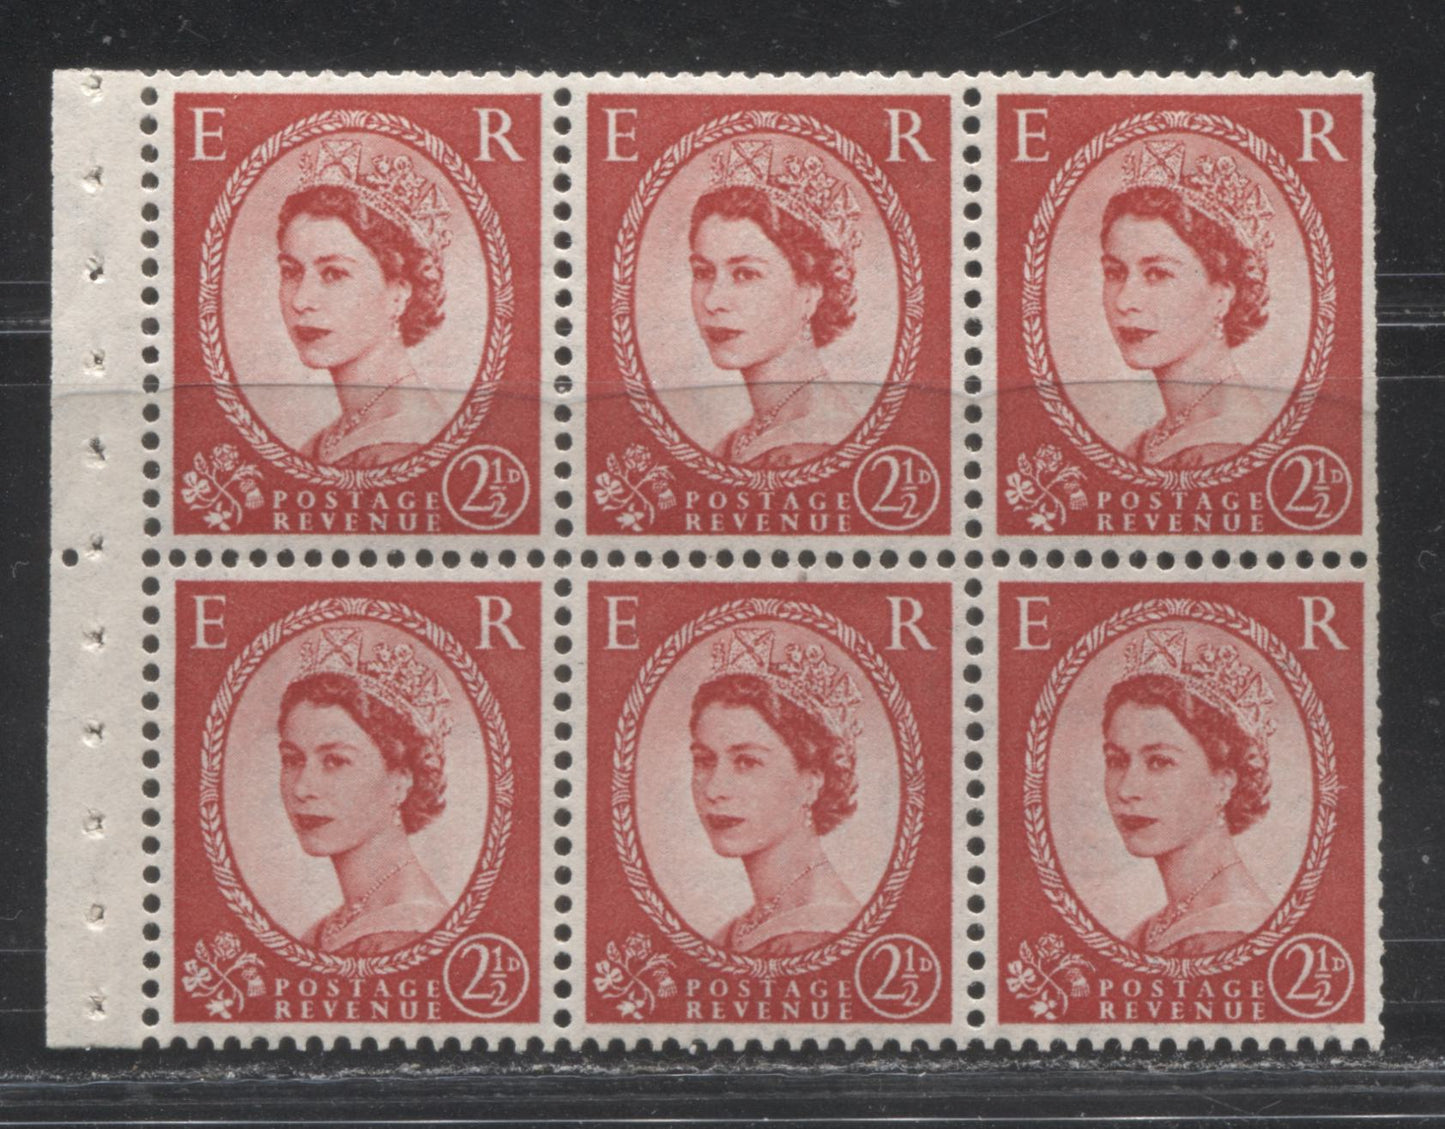 Great Britain SG#H37 5/- Light Grey Blue & Black Cover 1959-1967 Wilding Issue, A Complete Booklet With Mixed St. Edward's Crown & Multiple St. Edward's Crown Watermark, Panes of 6, Type C GPO Cypher, January 1959